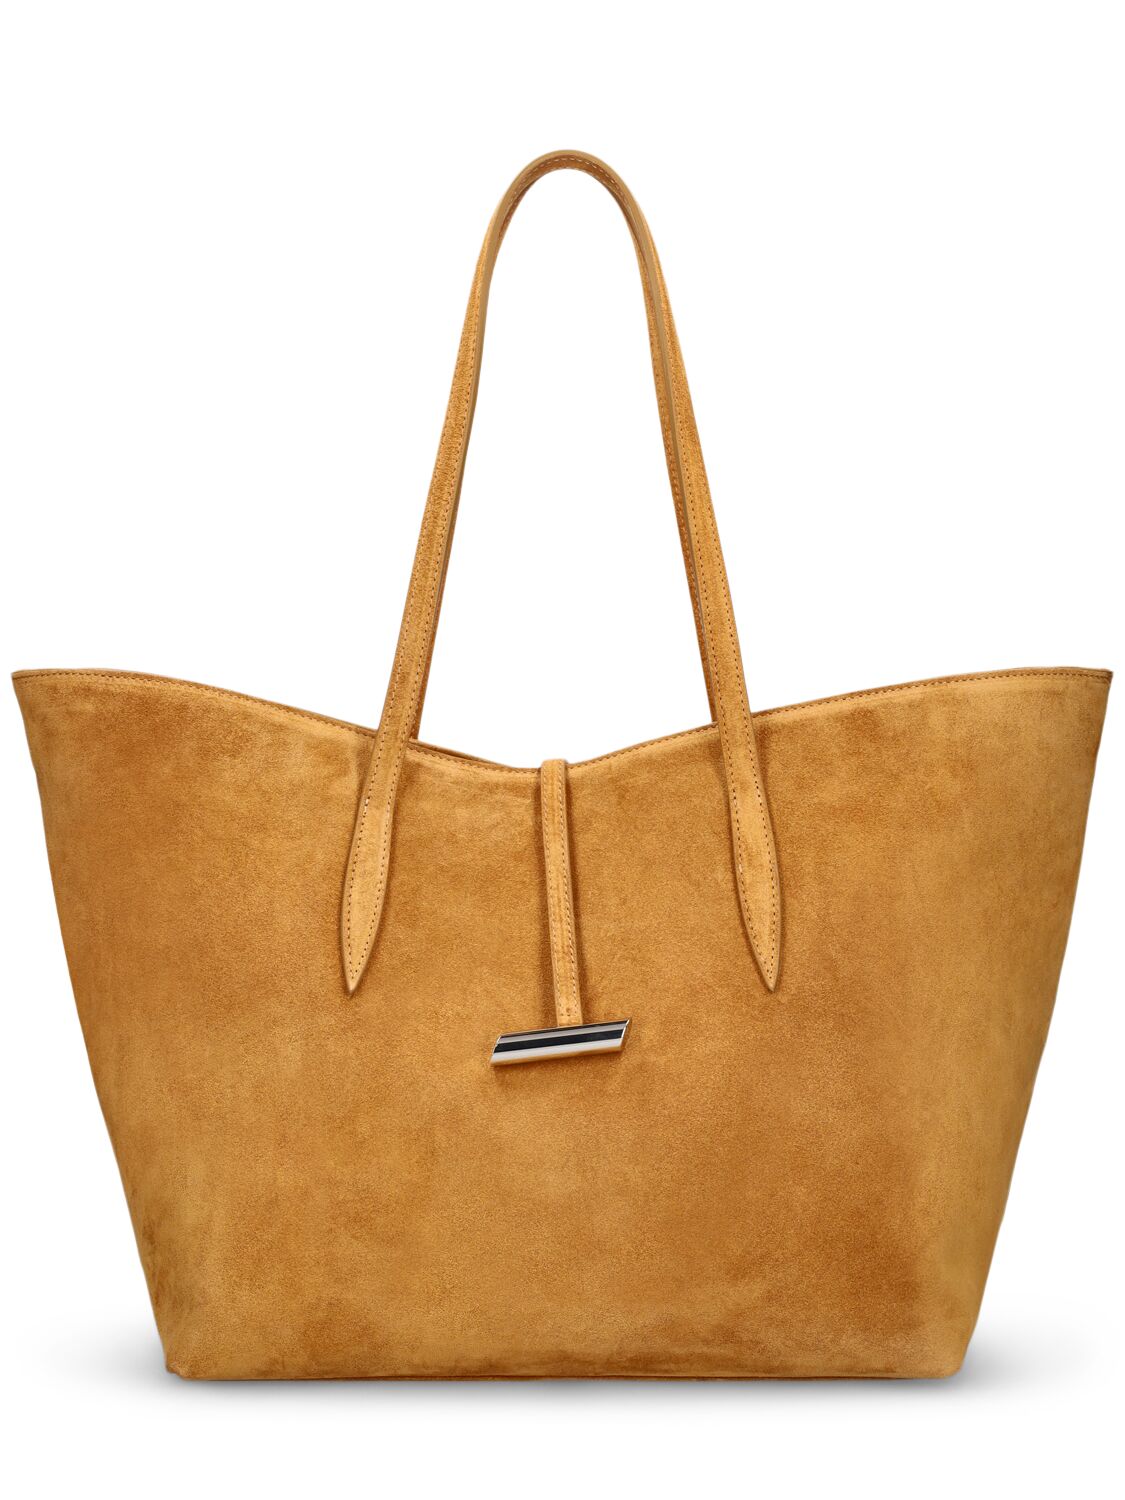 Image of Penne Suede Tote Bag